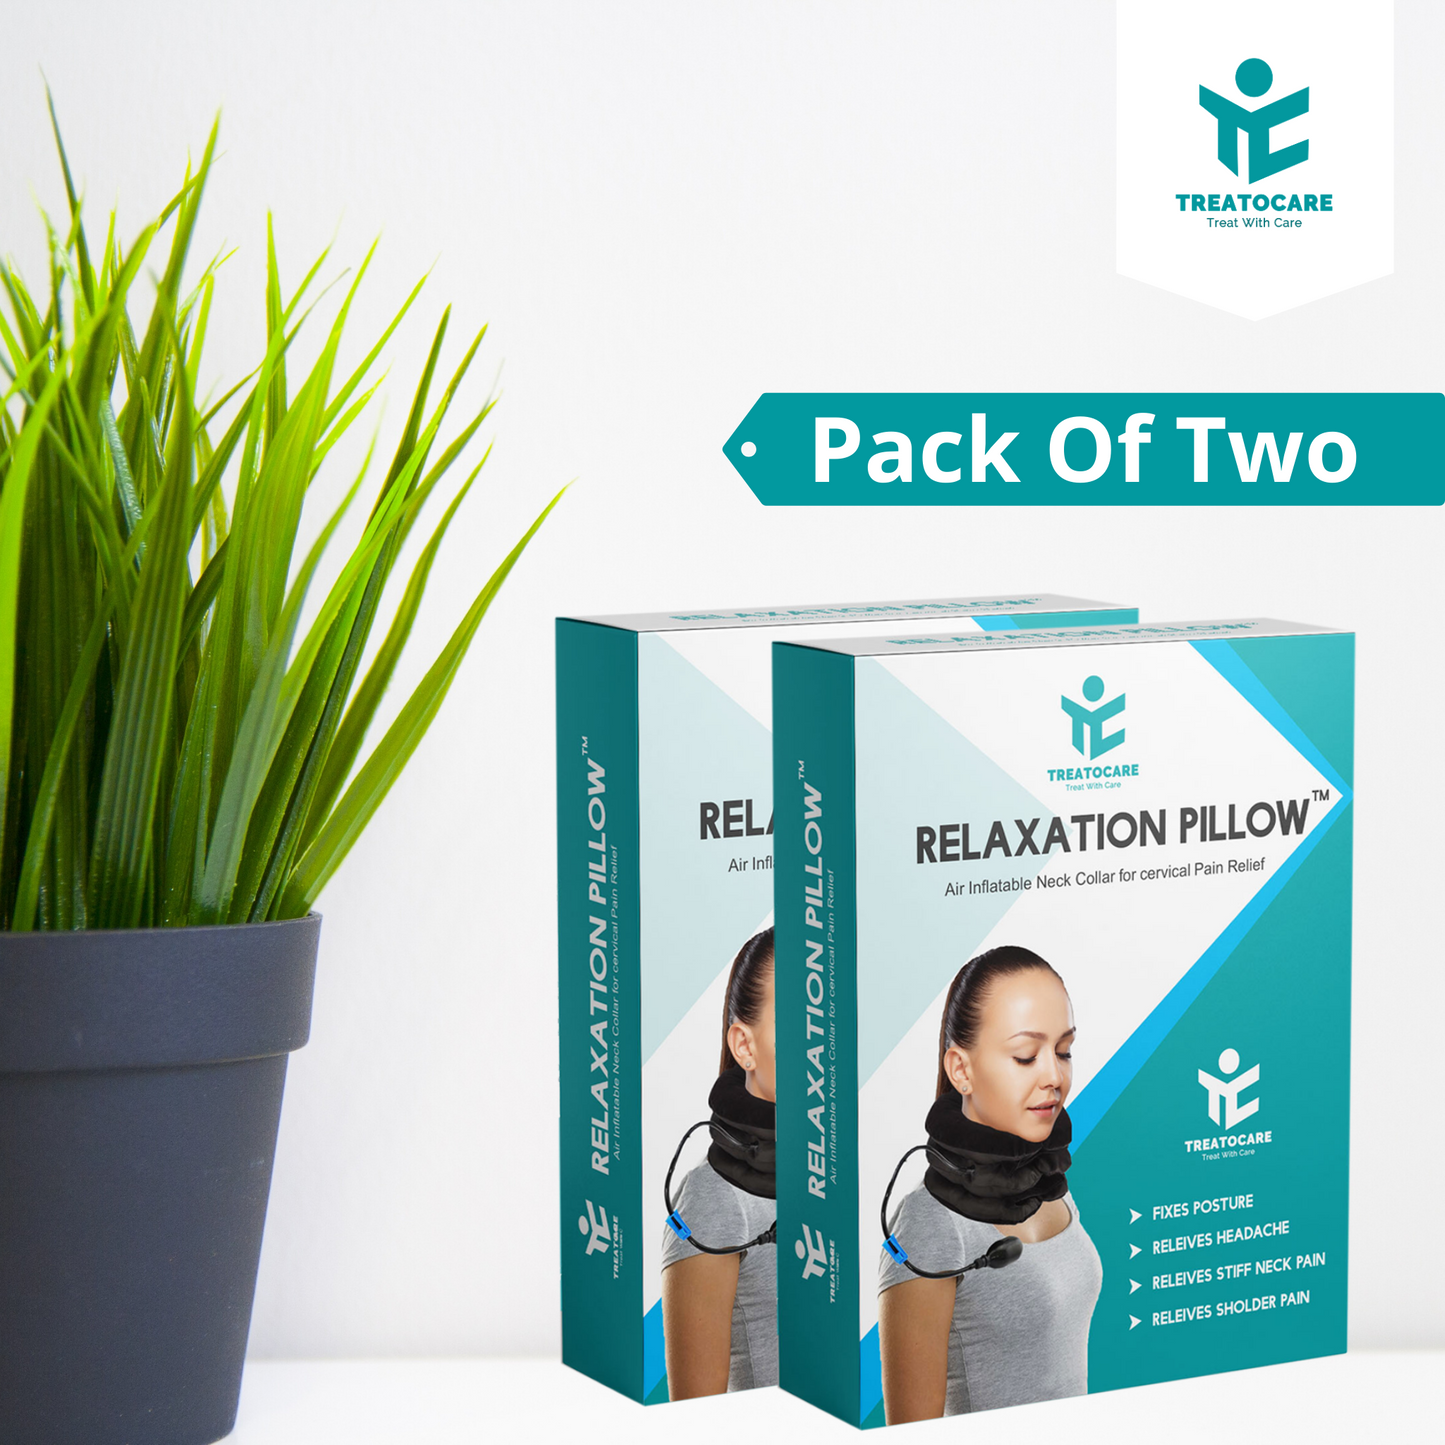 Relaxation Pillow - For Advance Treatment